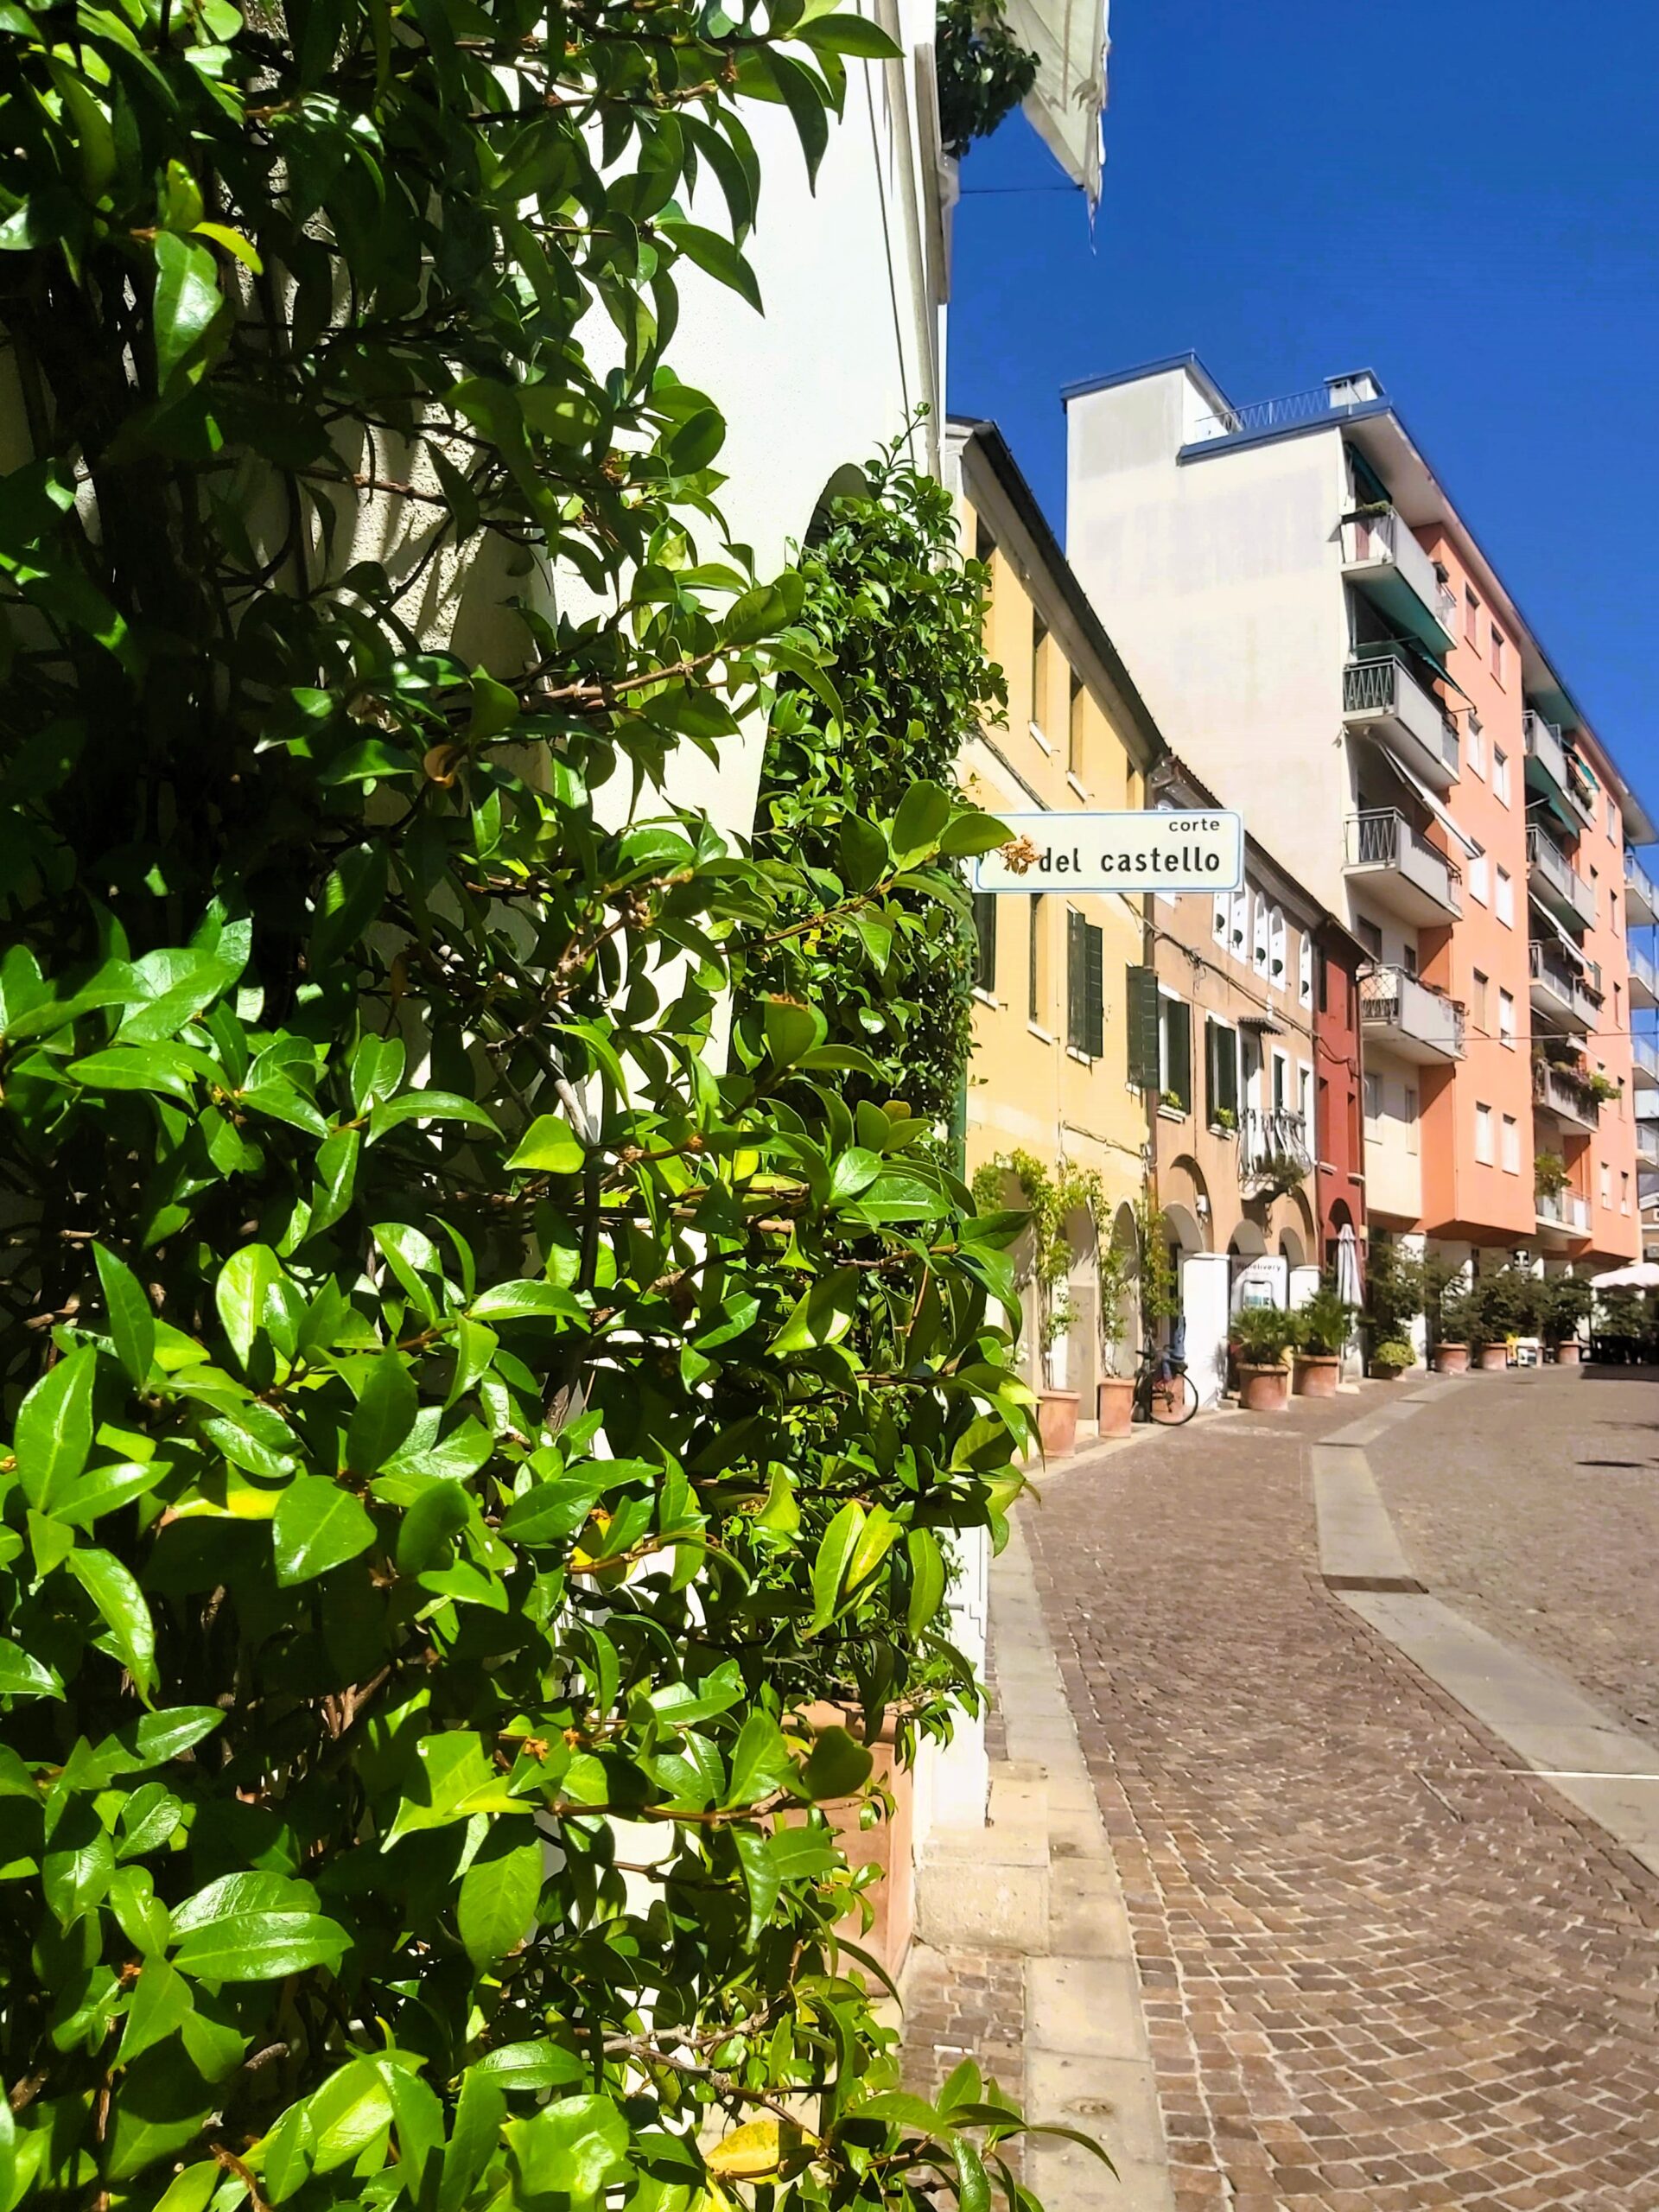 A pretty street with peach buildings and greenery in Mestre, Italy